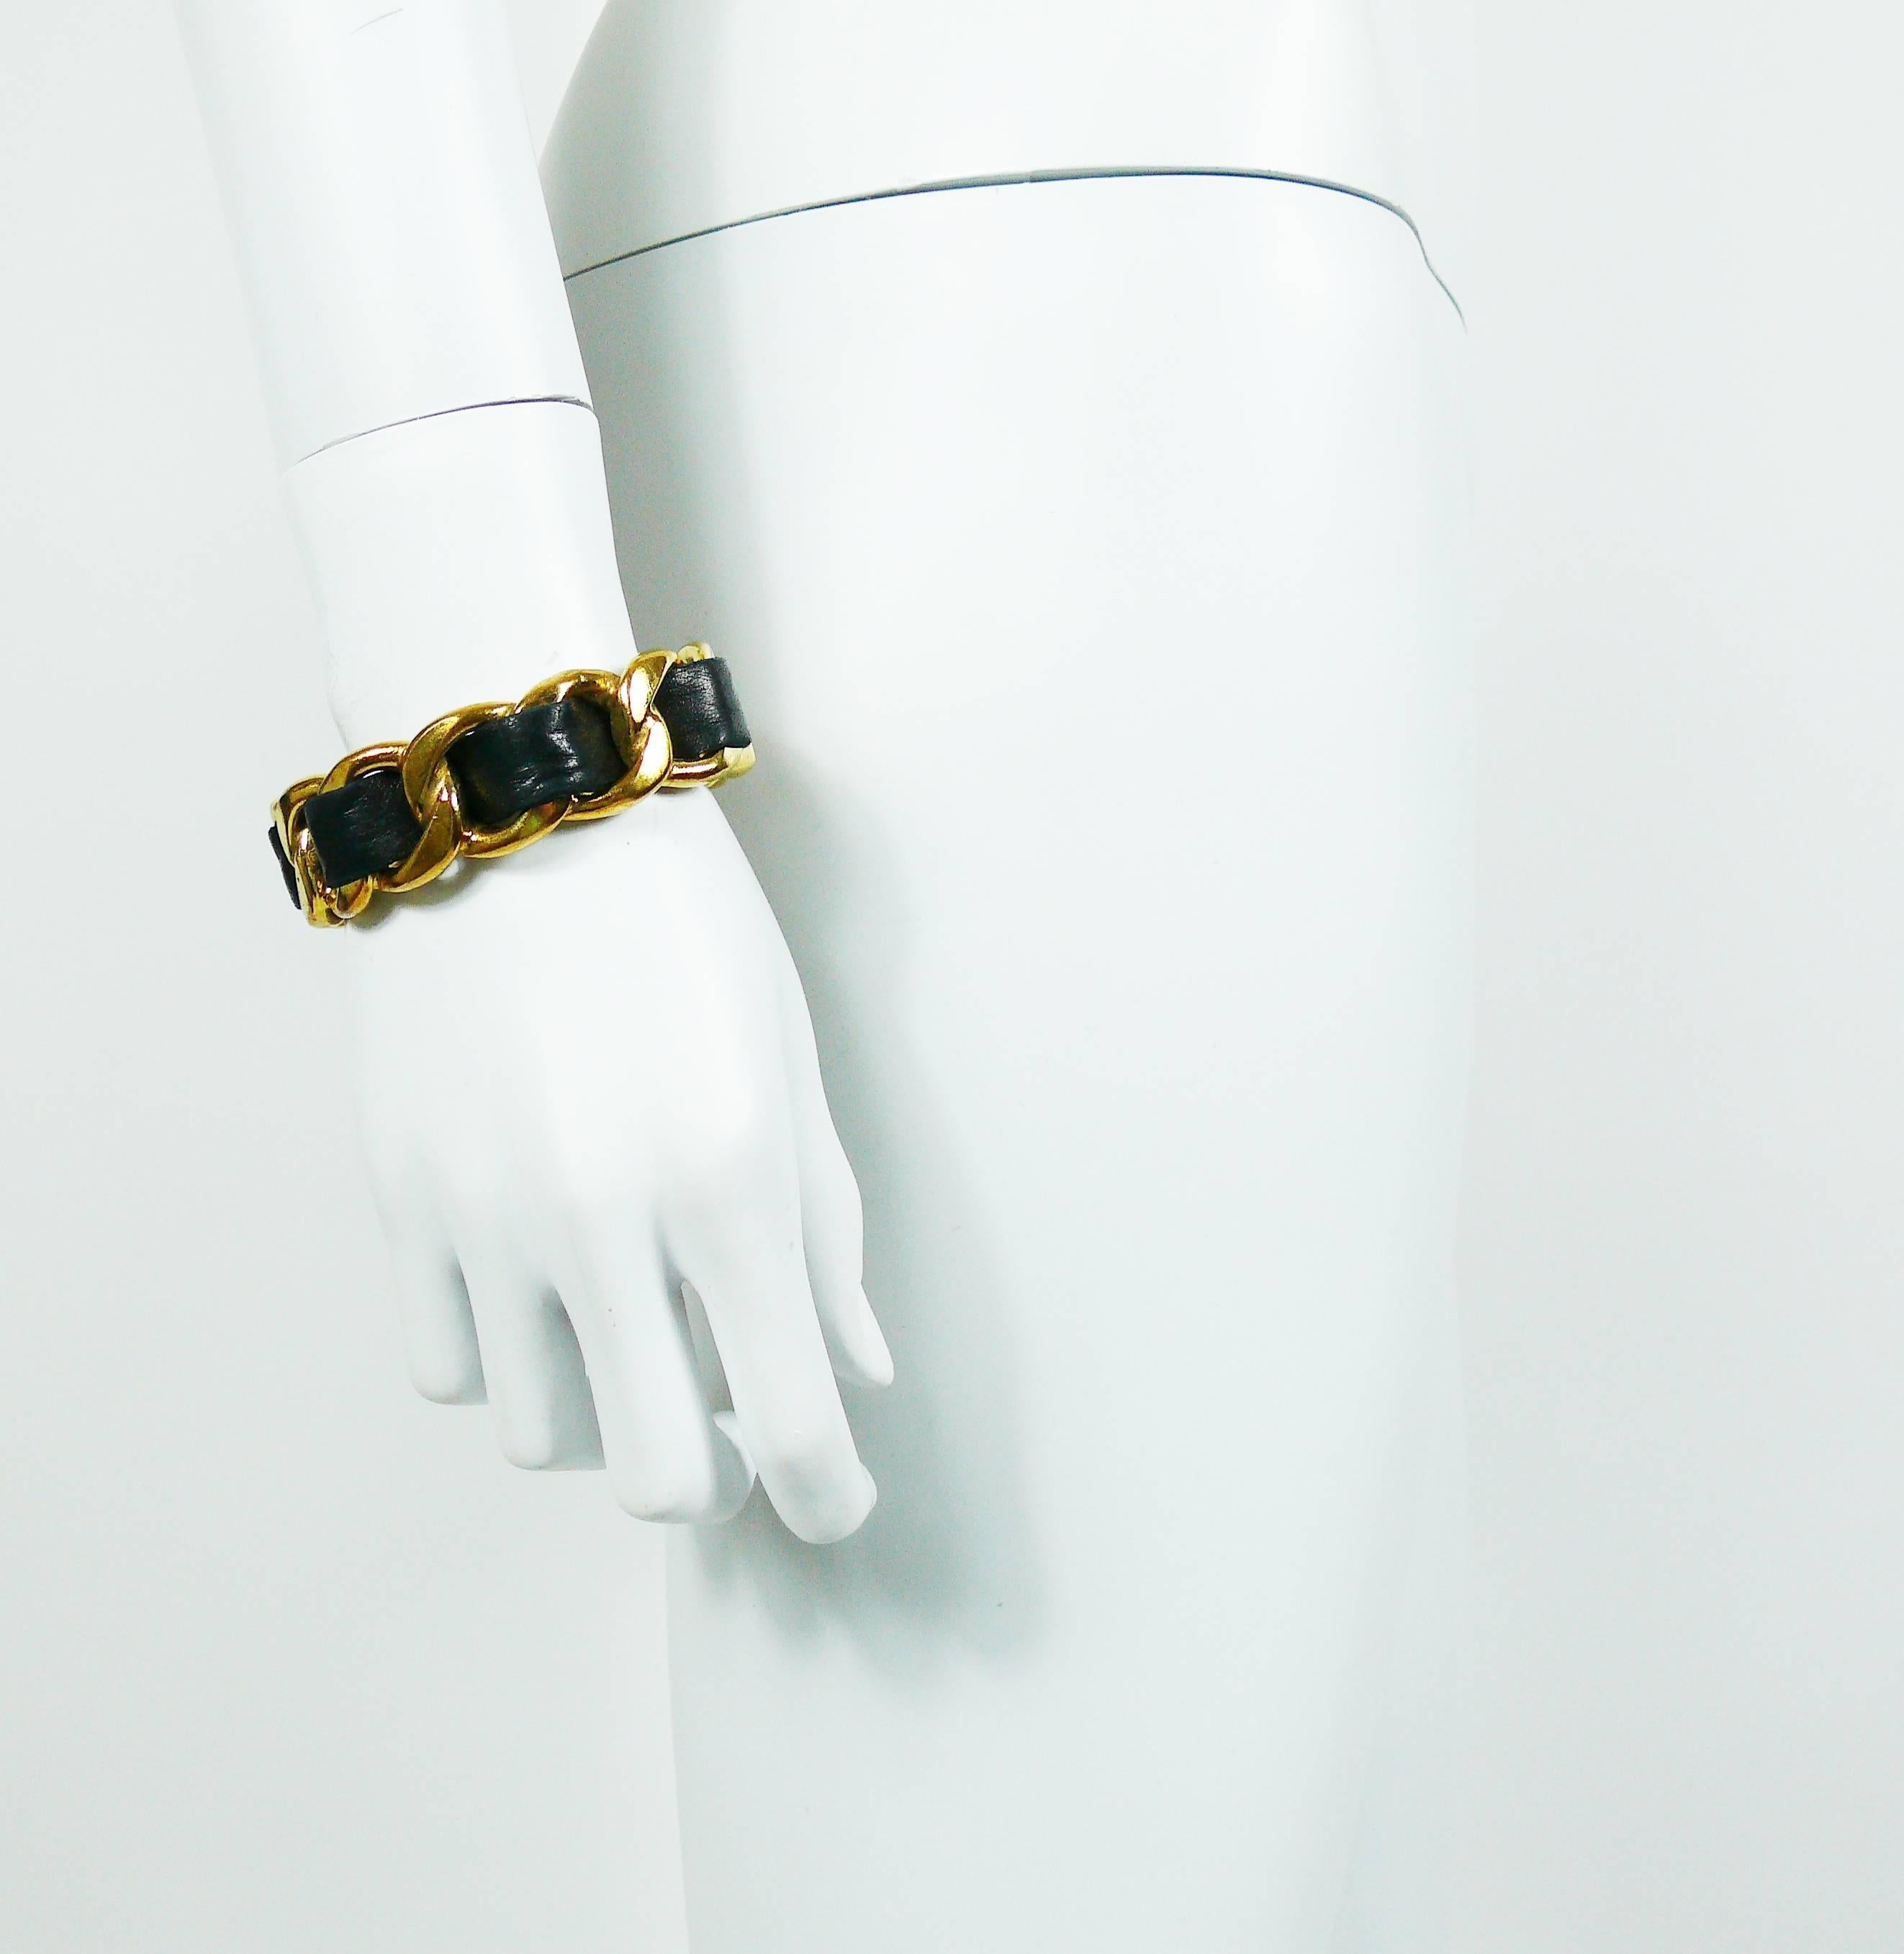 CHANEL vintage 1990 iconic gold toned curb chain and black leather cuff bracelet.

Marked CHANEL 2 5 Made in France.
Collection n°25 : 1990.

Indicative measurements : inner circumference approx. 20.42 cm (8.04 inches) / width approx. 2.1 cm (0.83